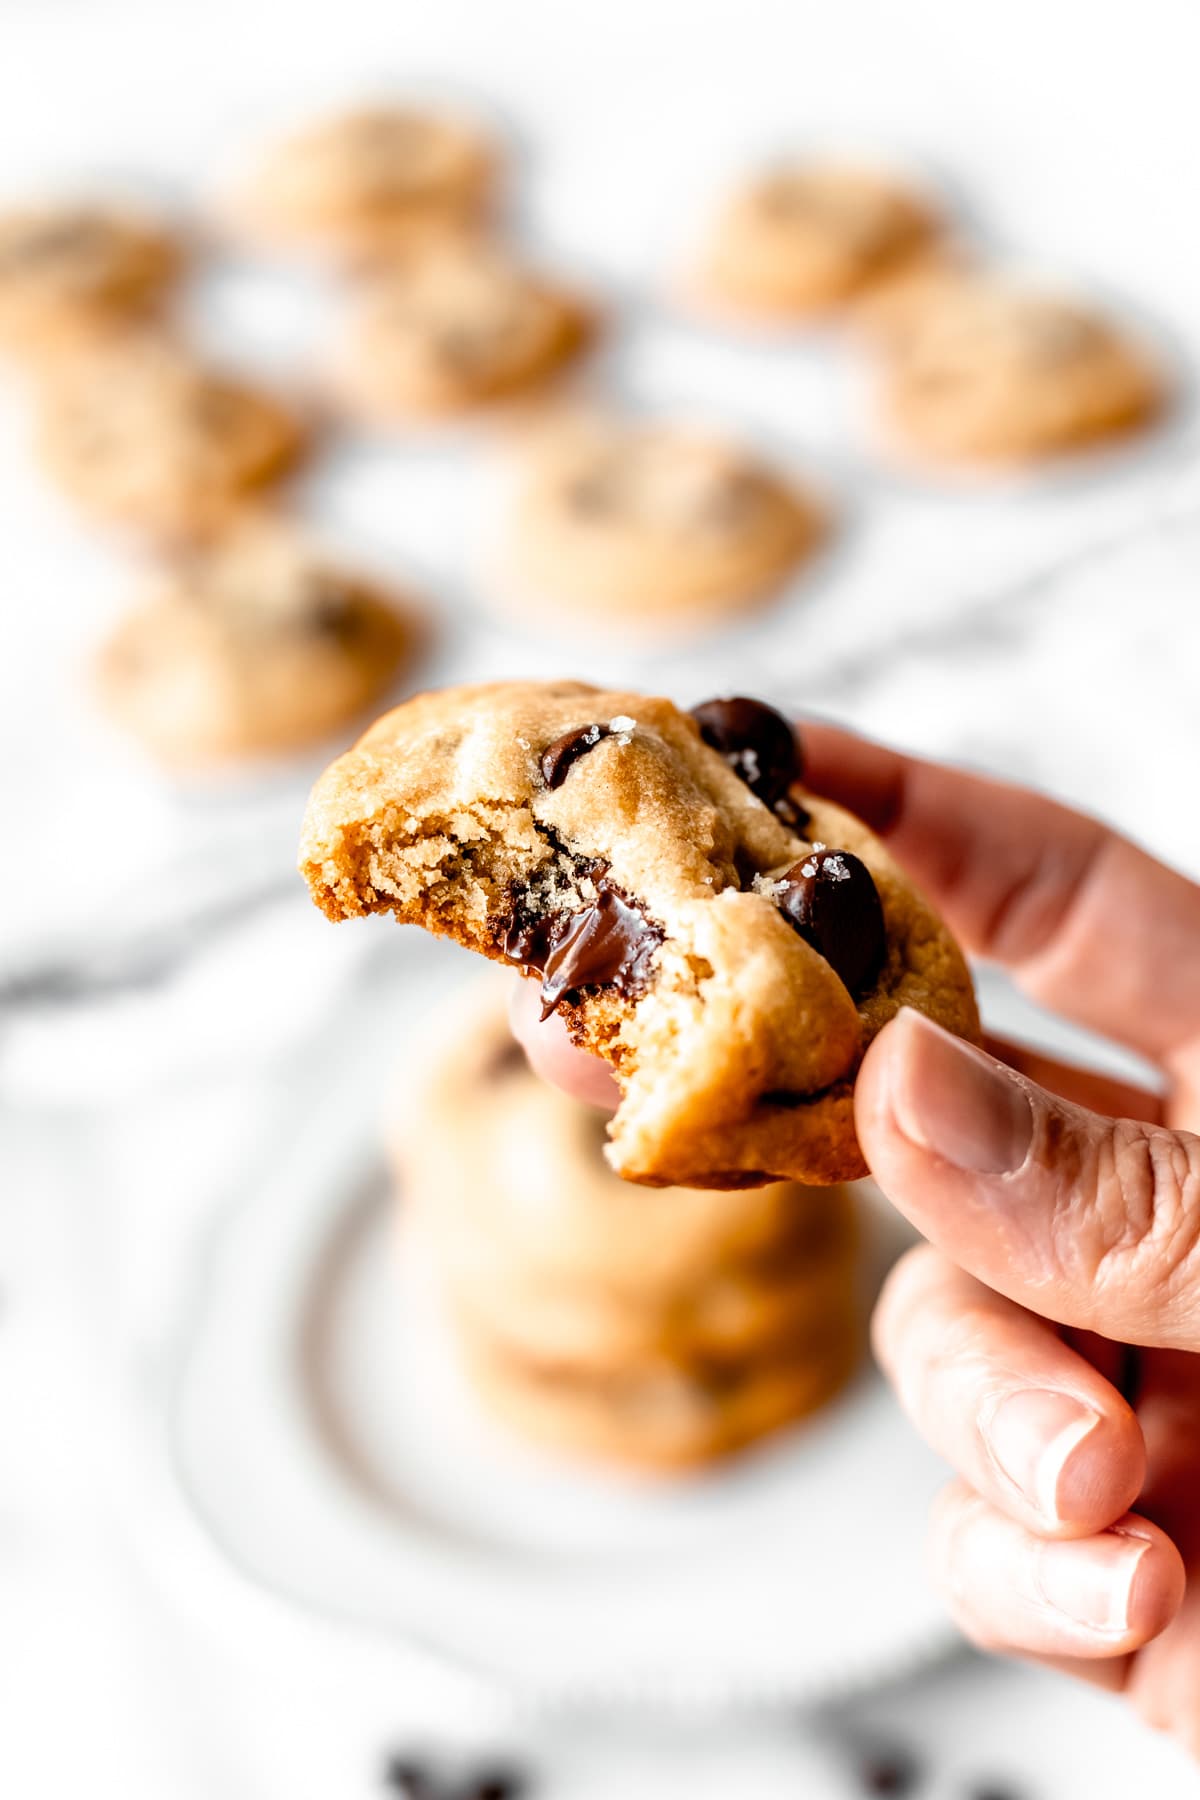 A hand holding up a dark chocolate chip cookie with a bite taken out of it and more cookies in the background.